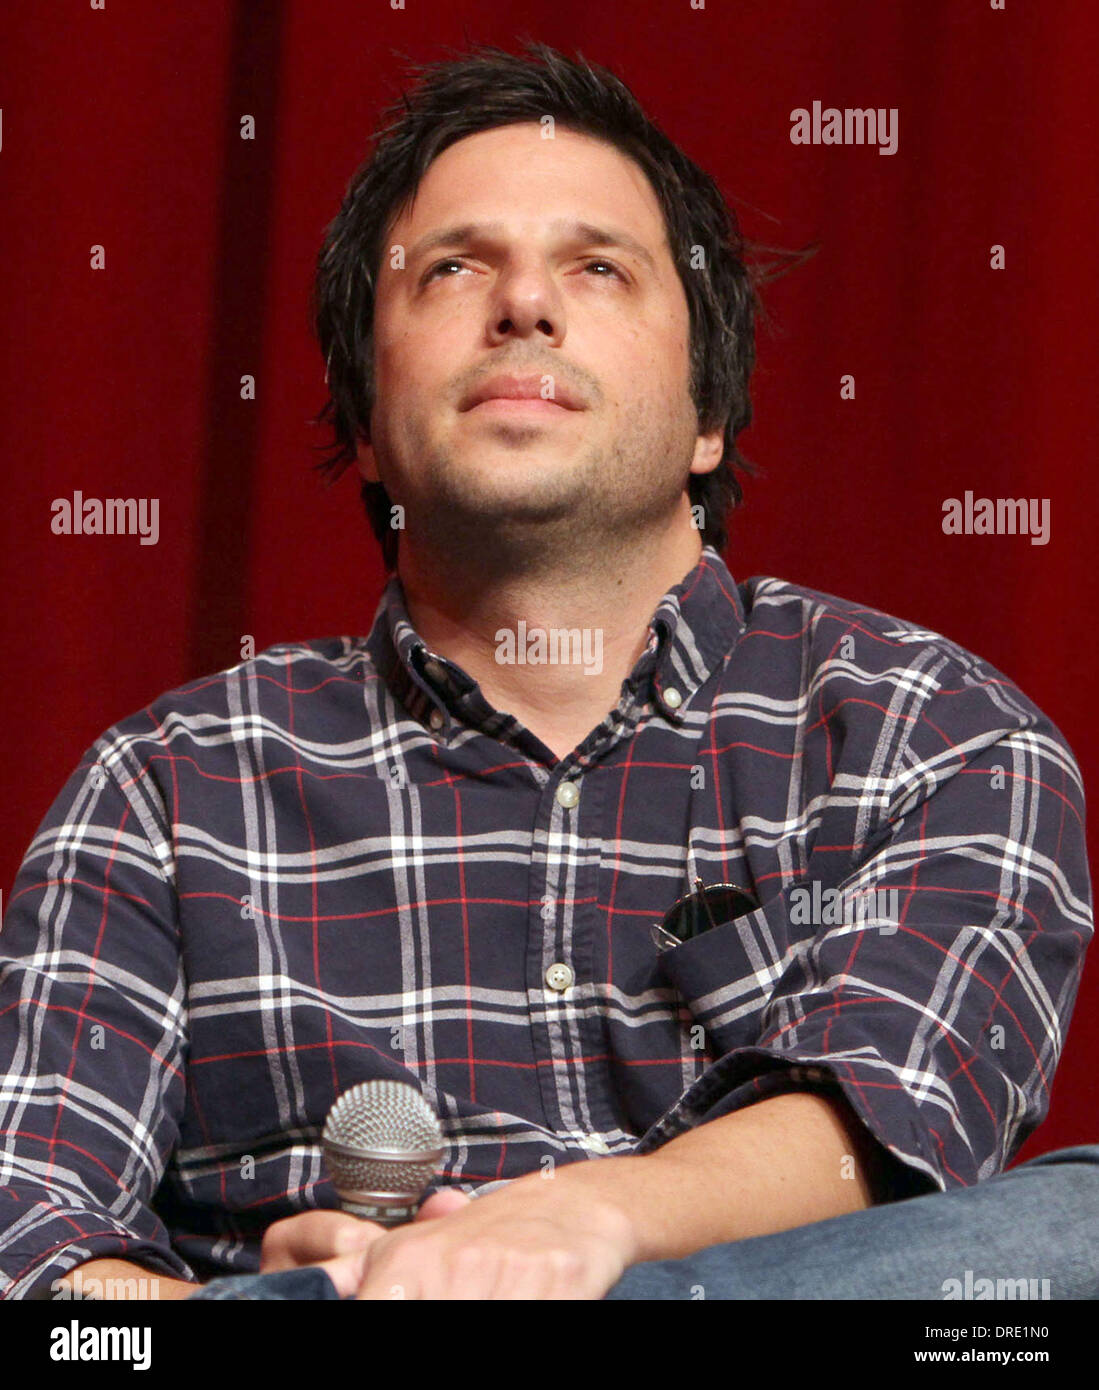 David Caspe 2012 OutFest Film Festival Q&A session of 'Happy Endings' held at The Directors Guild of America Los Angeles, California - 22.07.12 Stock Photo